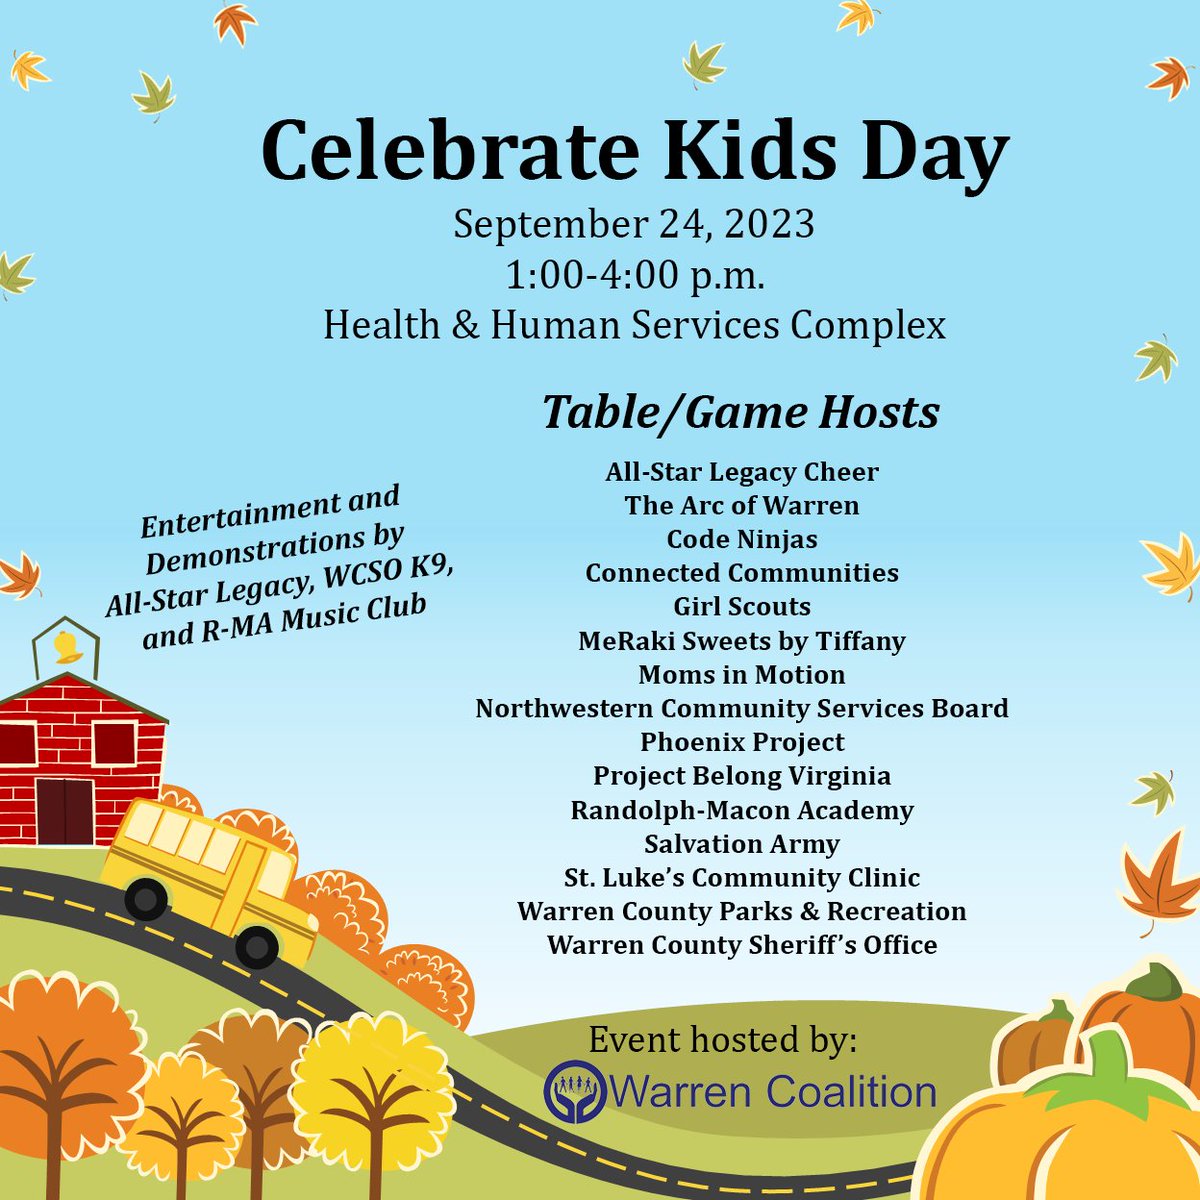 We have 15 organizations coming to join us for Celebrate Kids Day! To be a part of the fun, each one has been asked to set up a game or activity for kids. (And that's on top of the inflatables, petting zoo, pony rides, face painting, and pumpkin painting!)